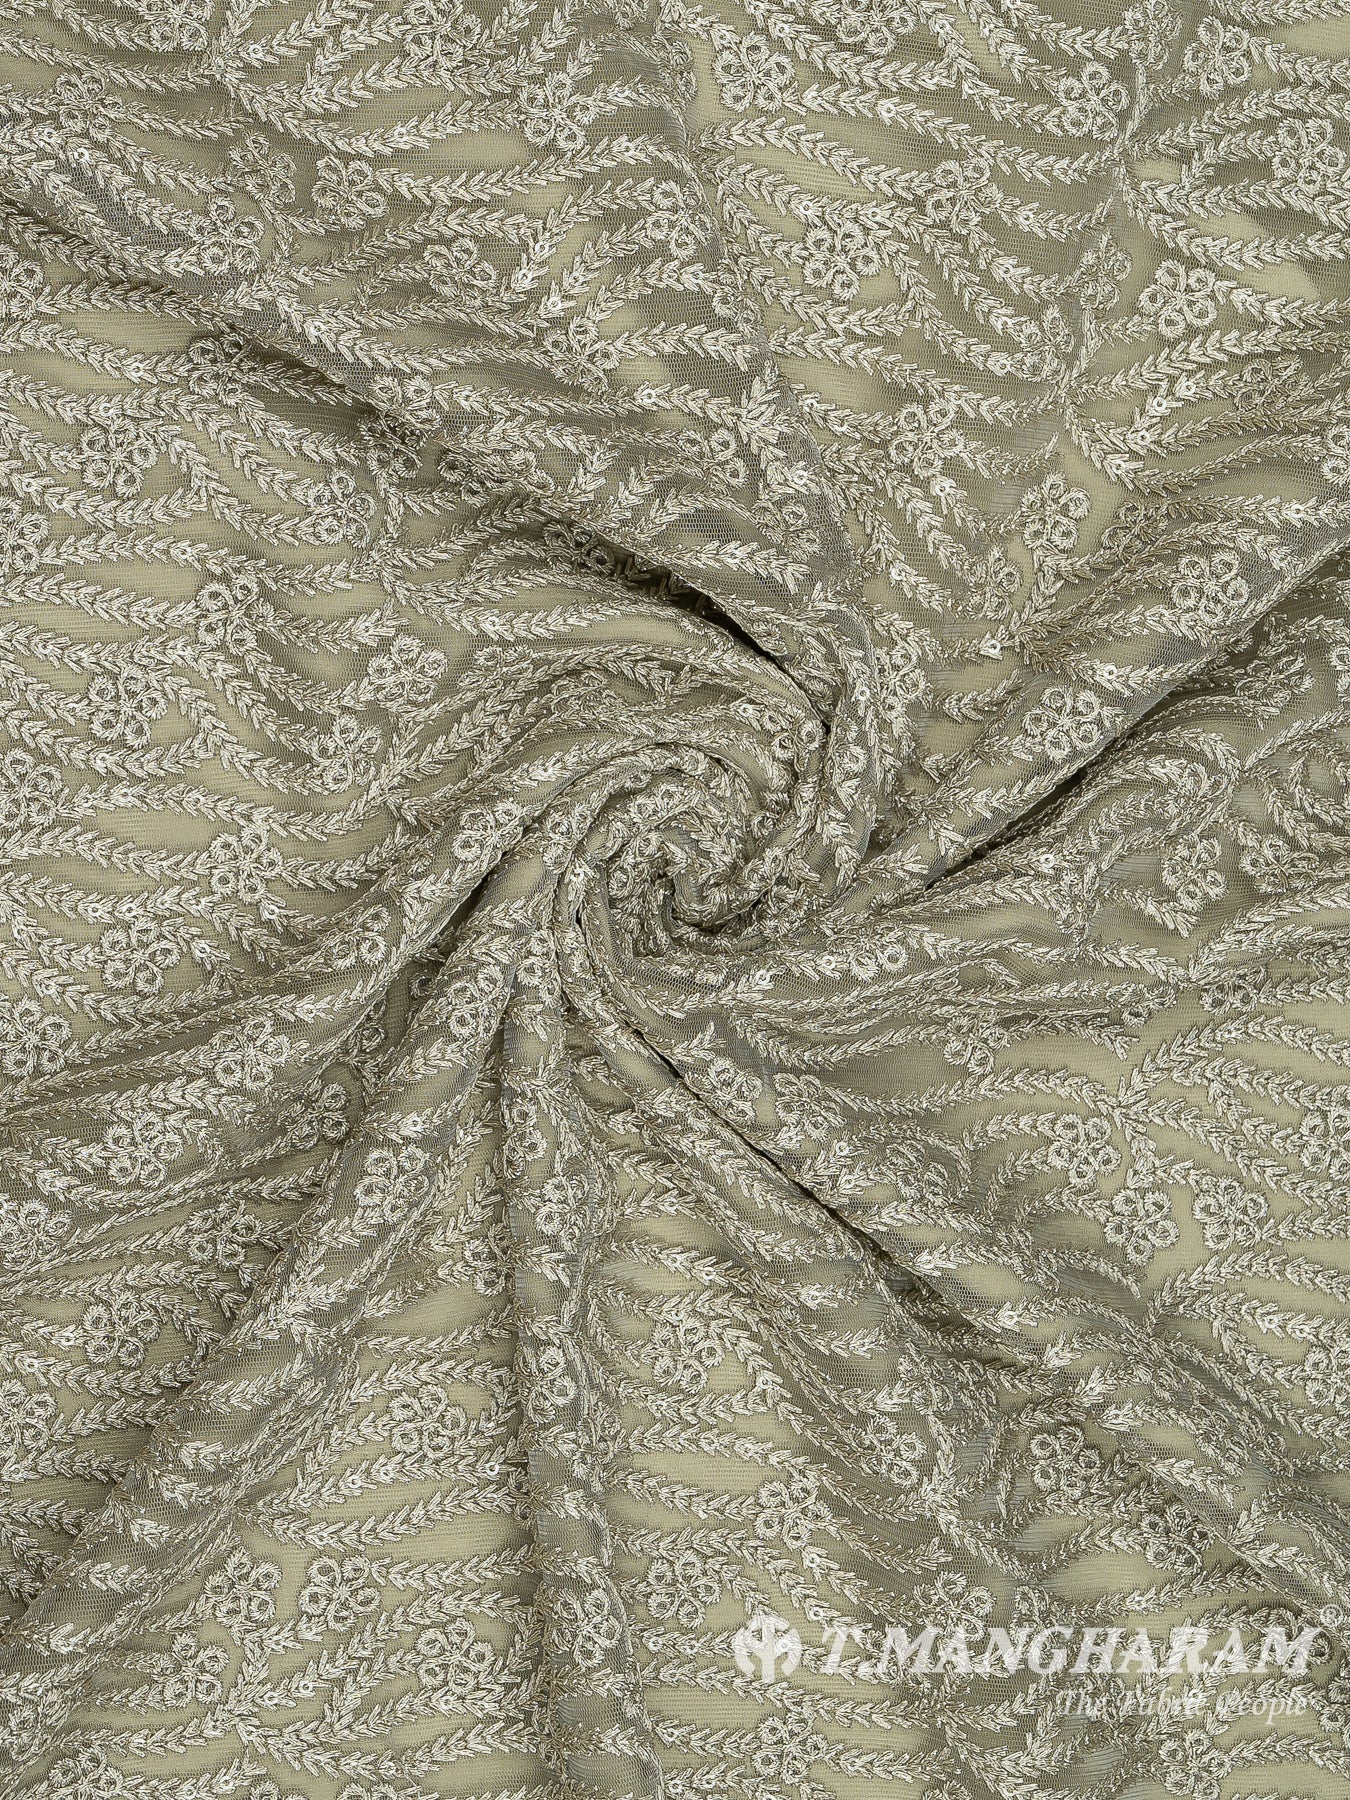 Green Net Embroidery Fabric - EC8426 view-1